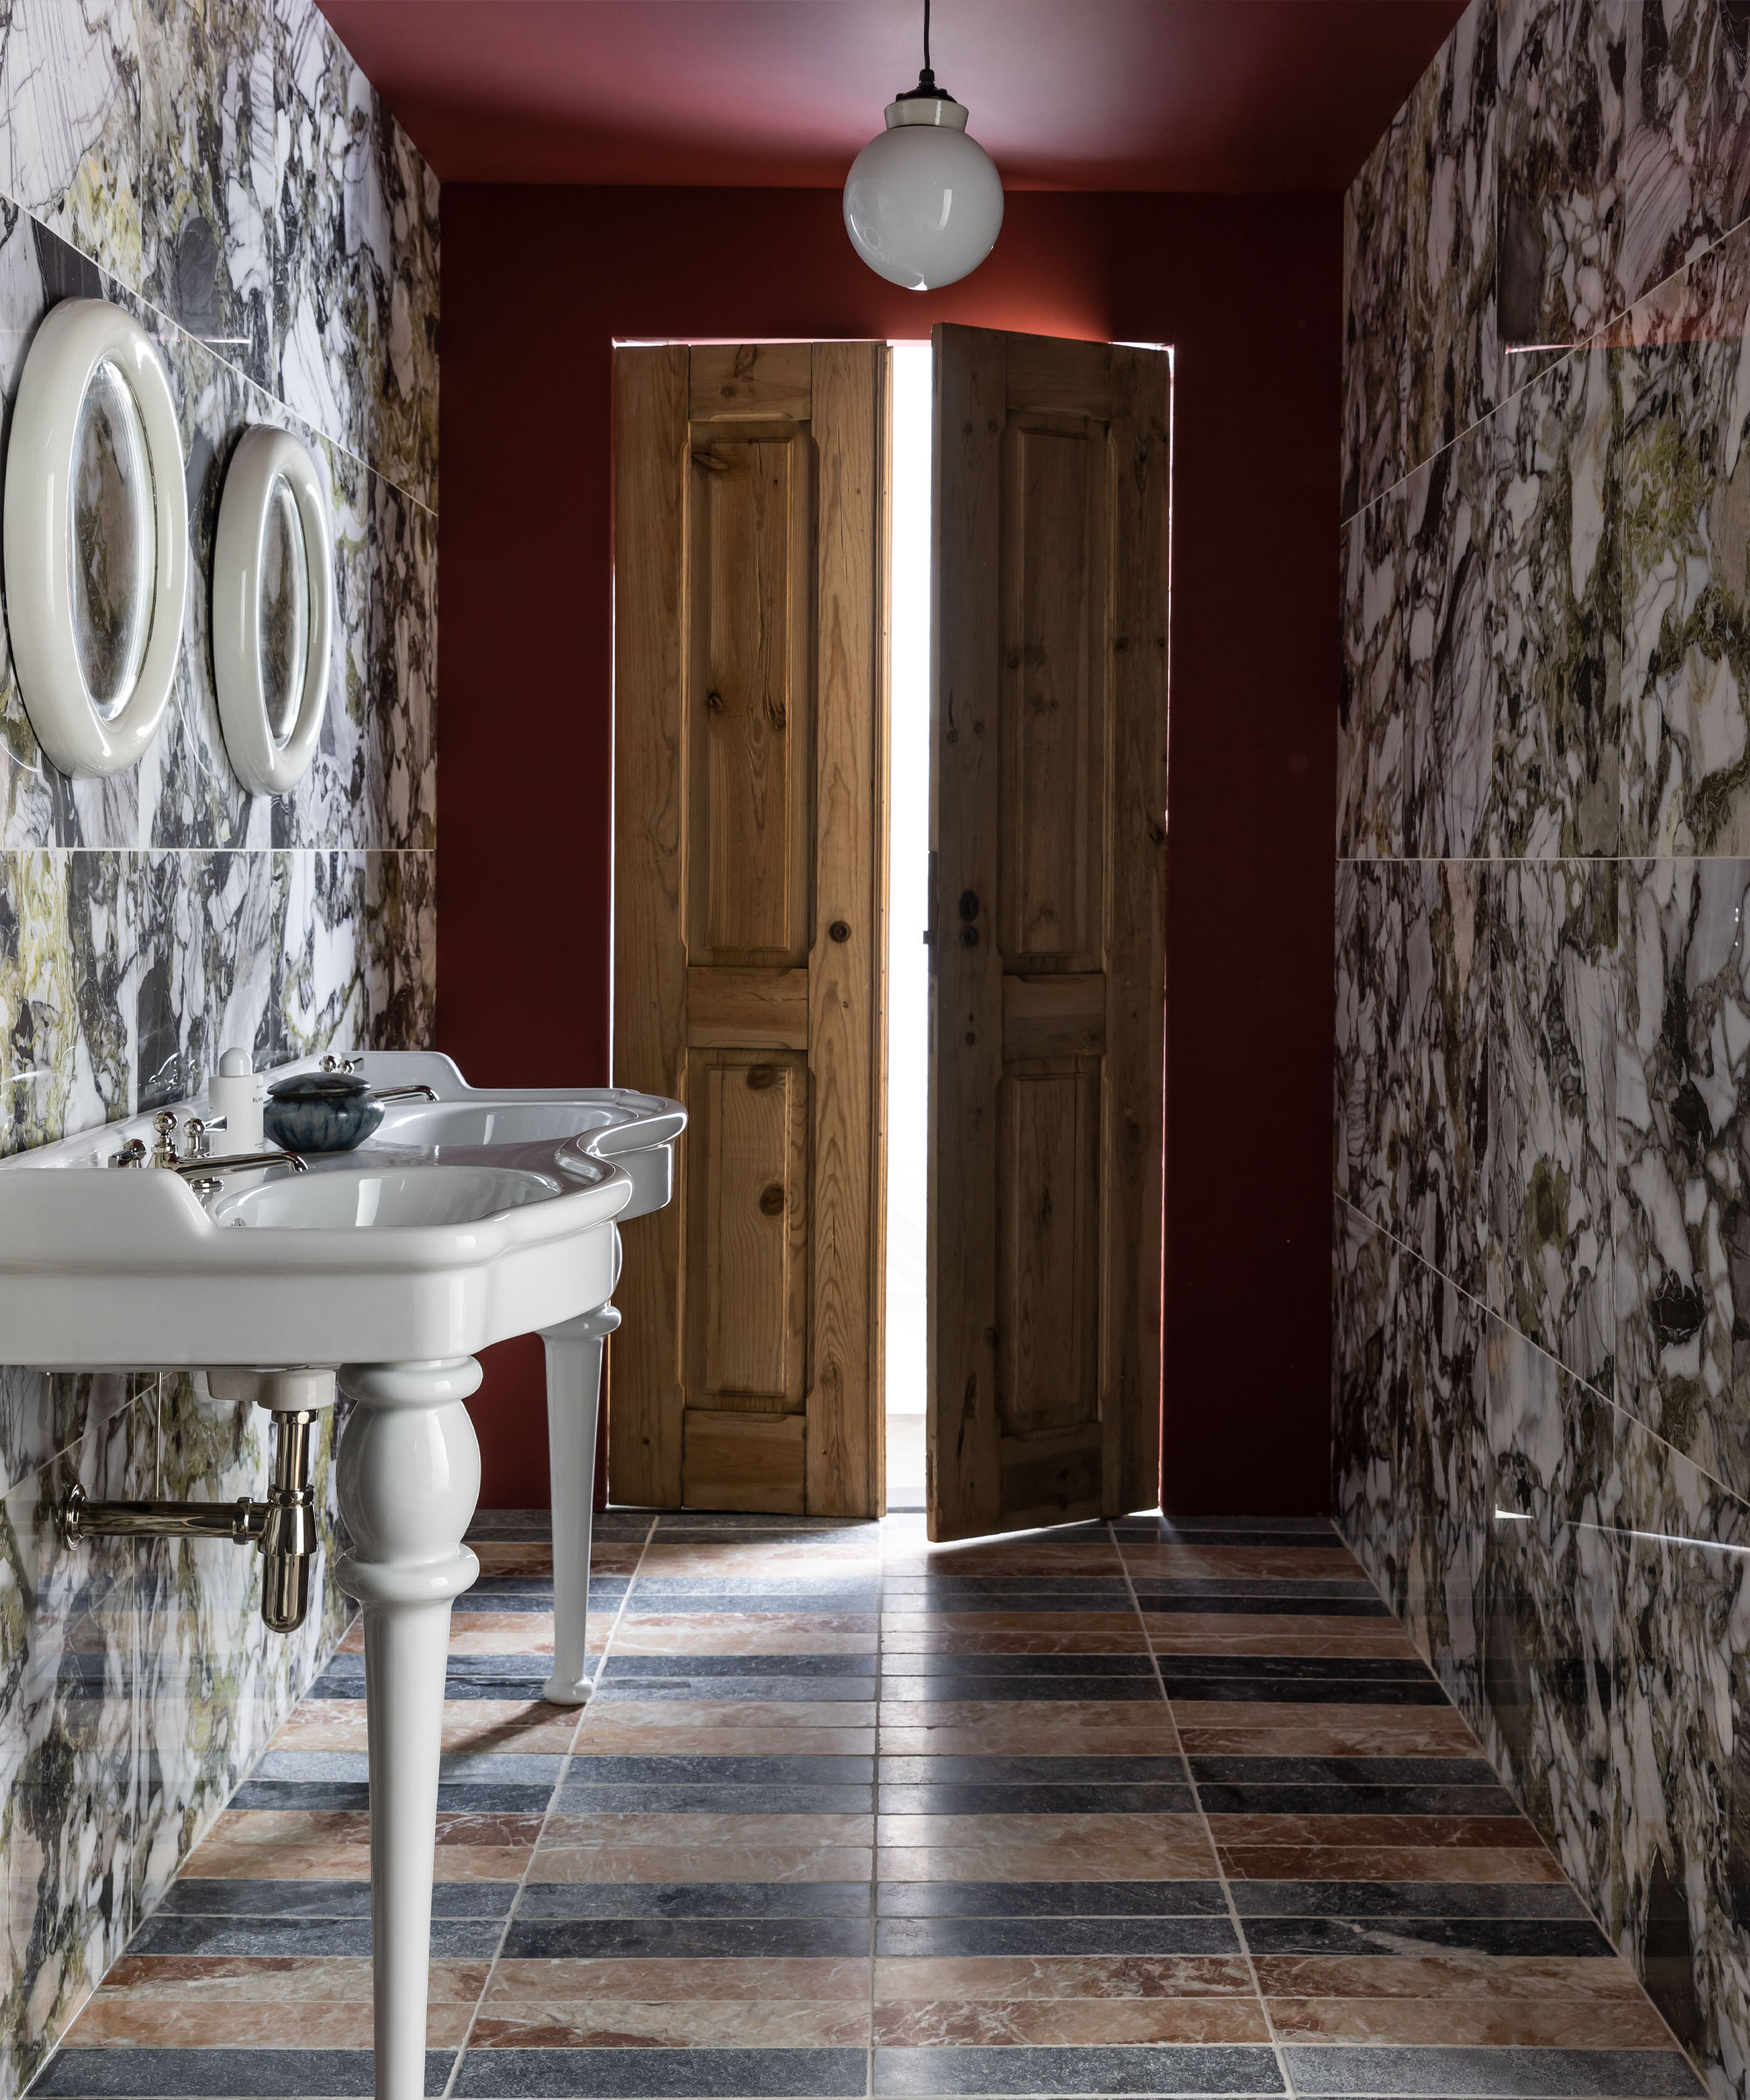 Bathroom with tiled flooring in black and brown floor tiles, multi-colored marble wall tiles, dark red painted wall and ceiling, traditional wooden shutter doors, twin basin sink with two rounded white mirrors mounted above, rounded opal glass pendant light